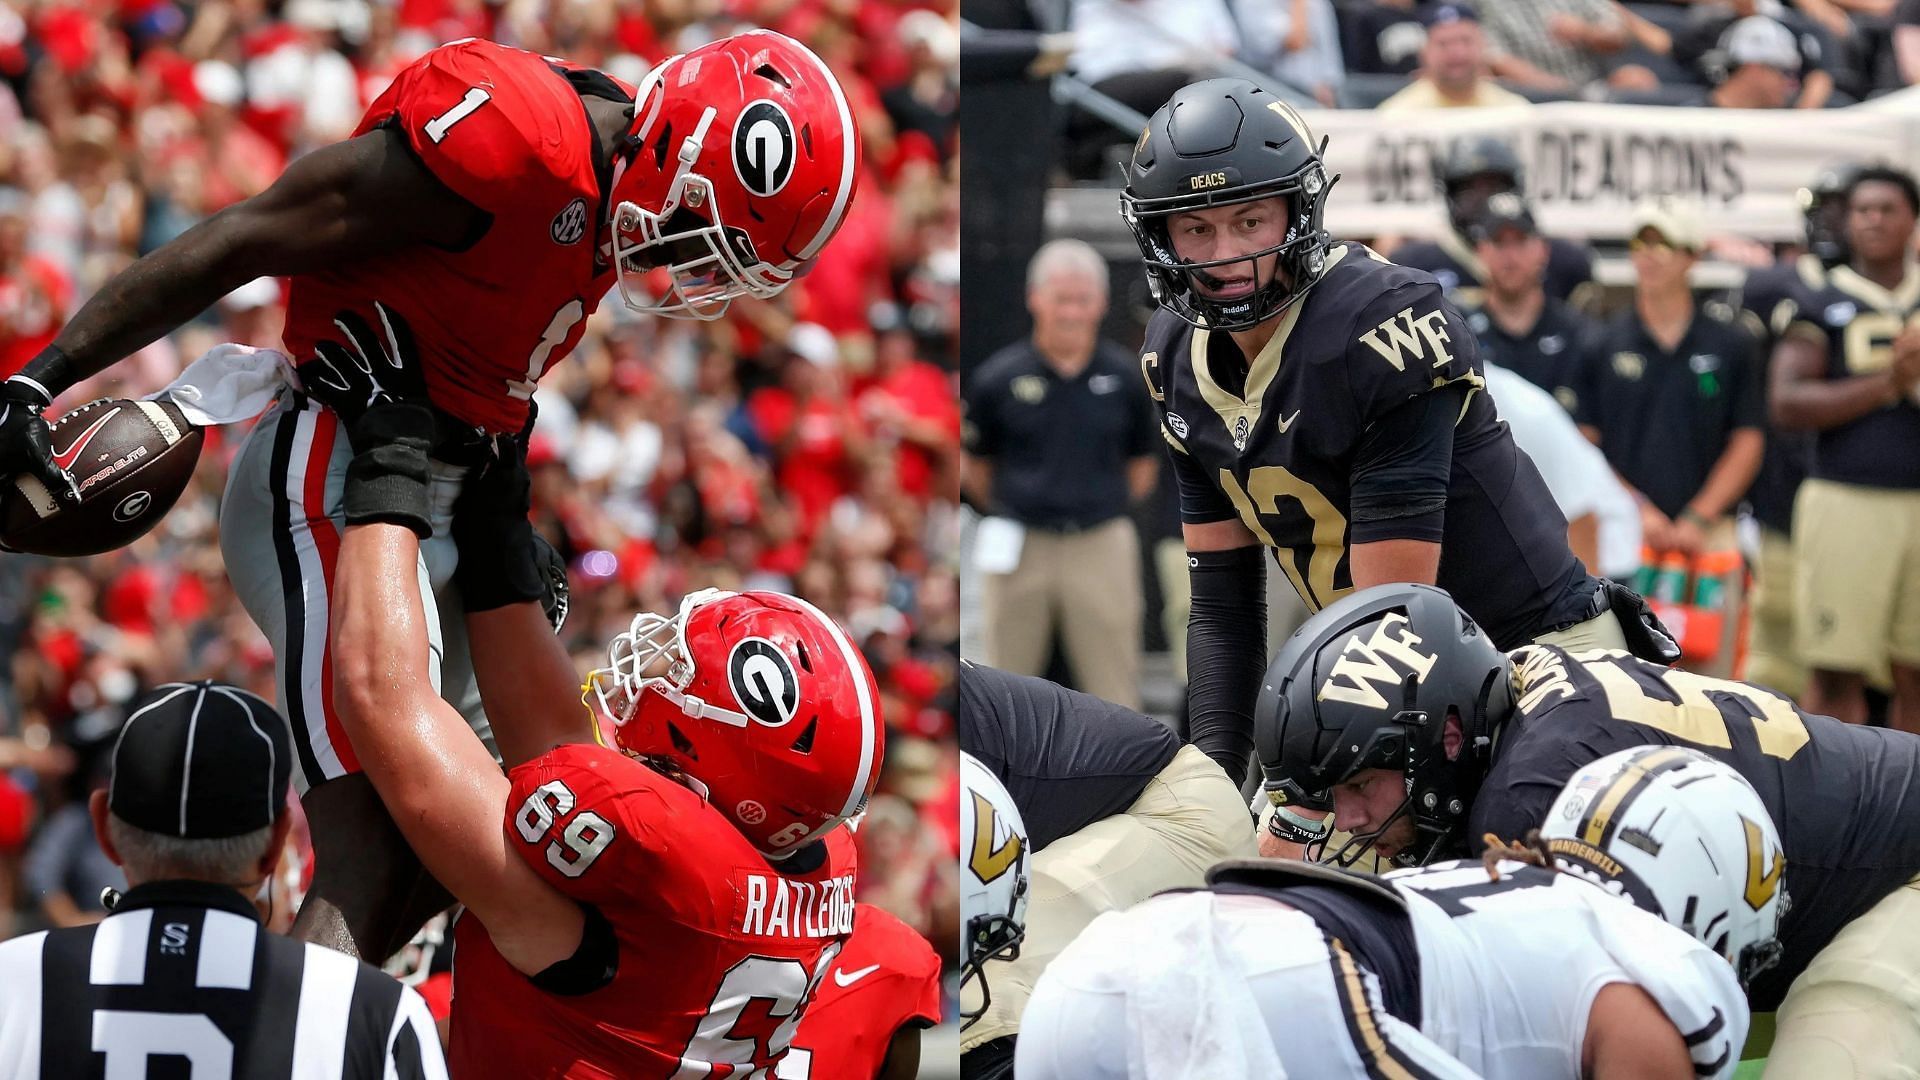 Georgia and Wake Forest are among the college football teams with the best non-conference records in the past three seasons